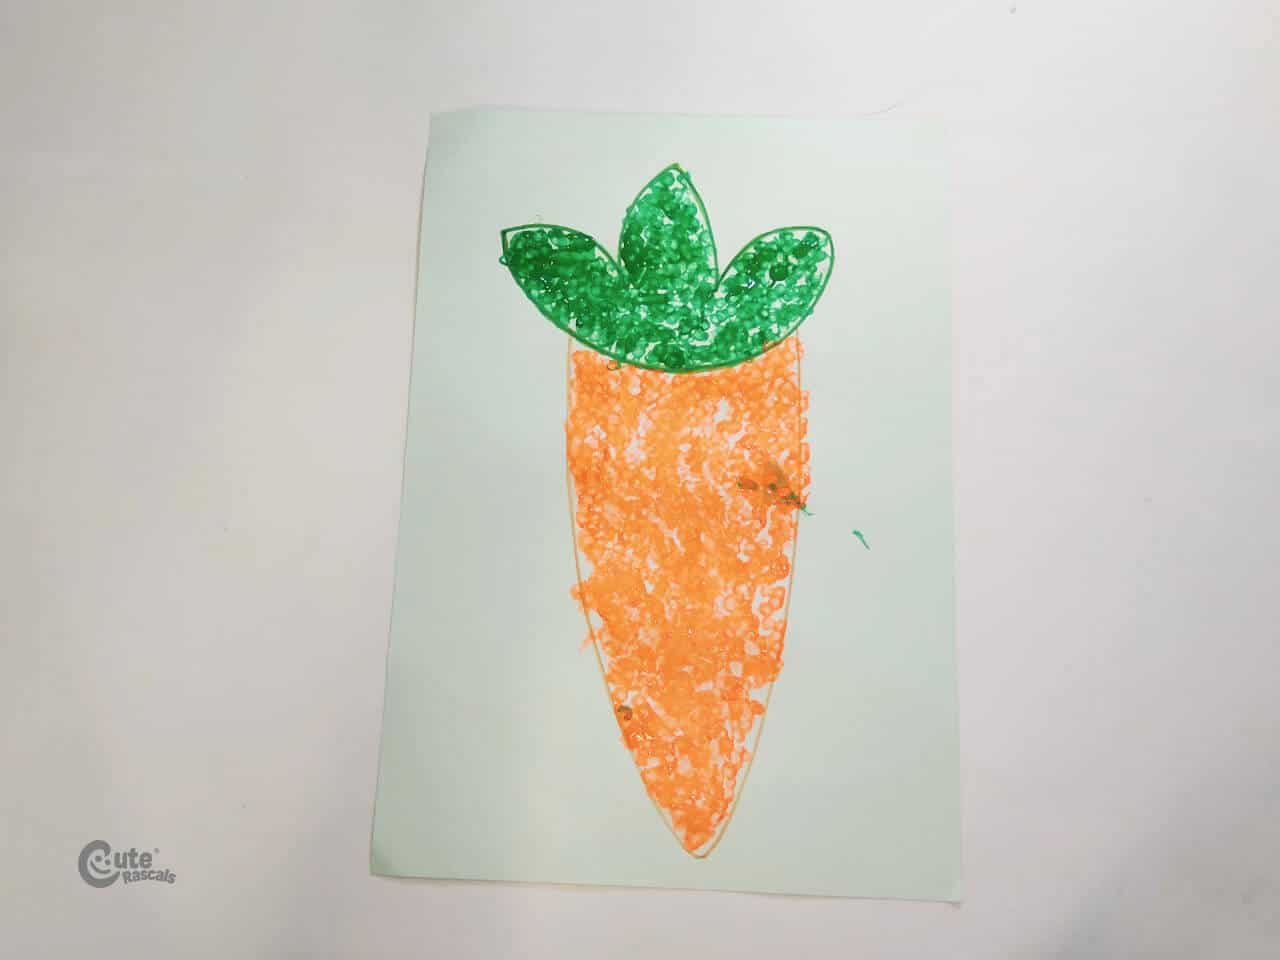 Carrot art with cotton swabs